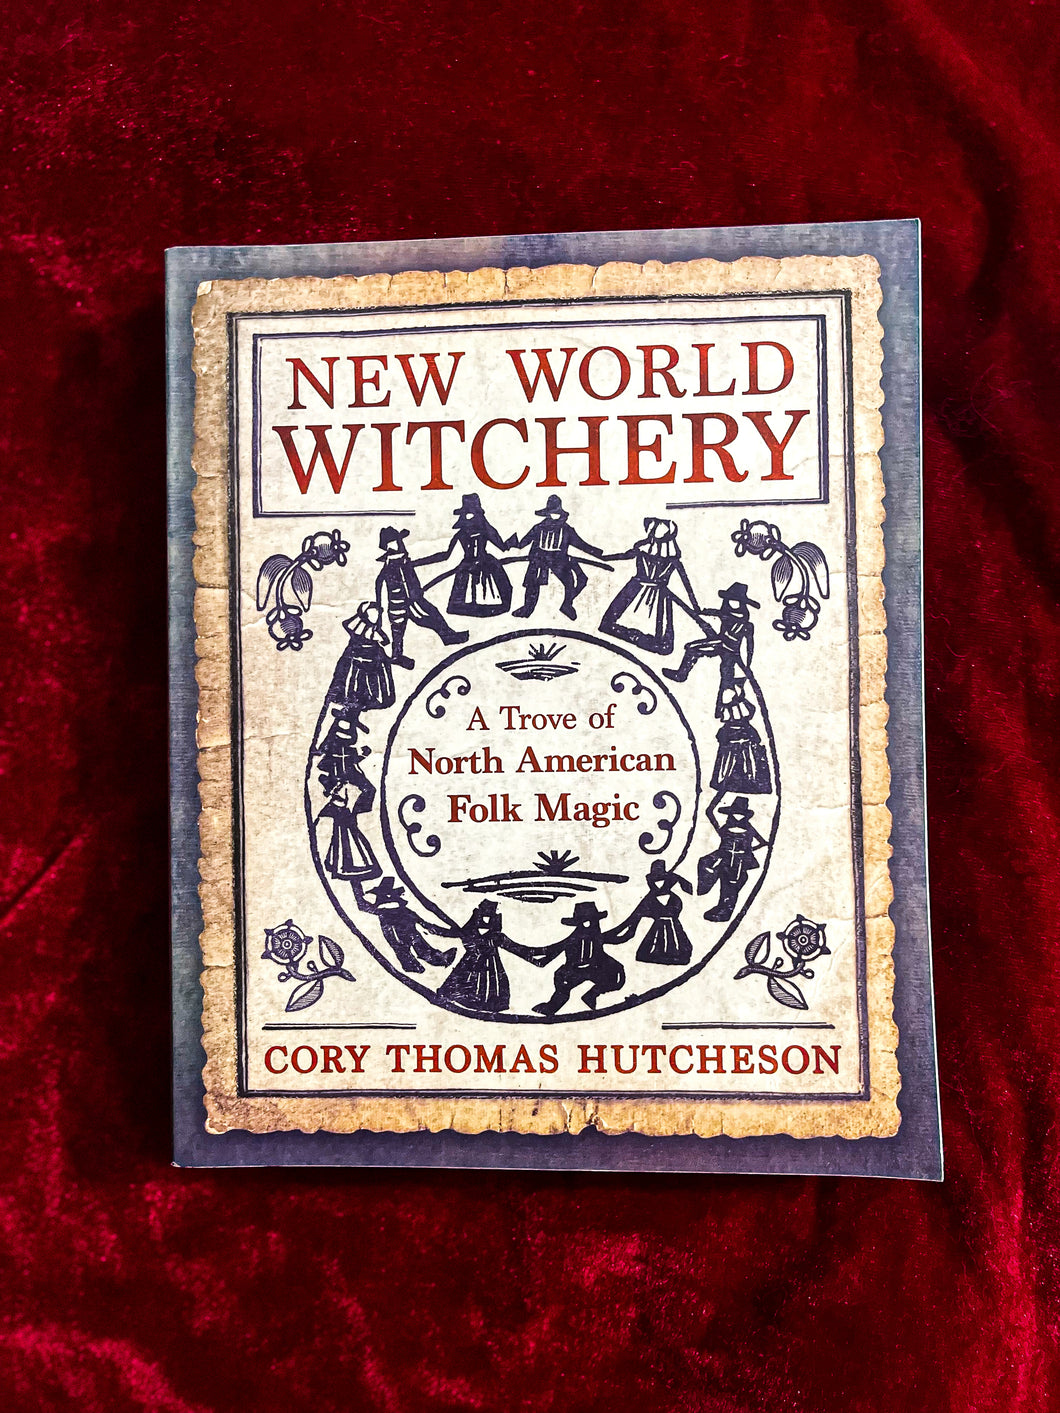 New World Witchery: A Trove of North American Folk Magic by Cory Thomas Hutcheson